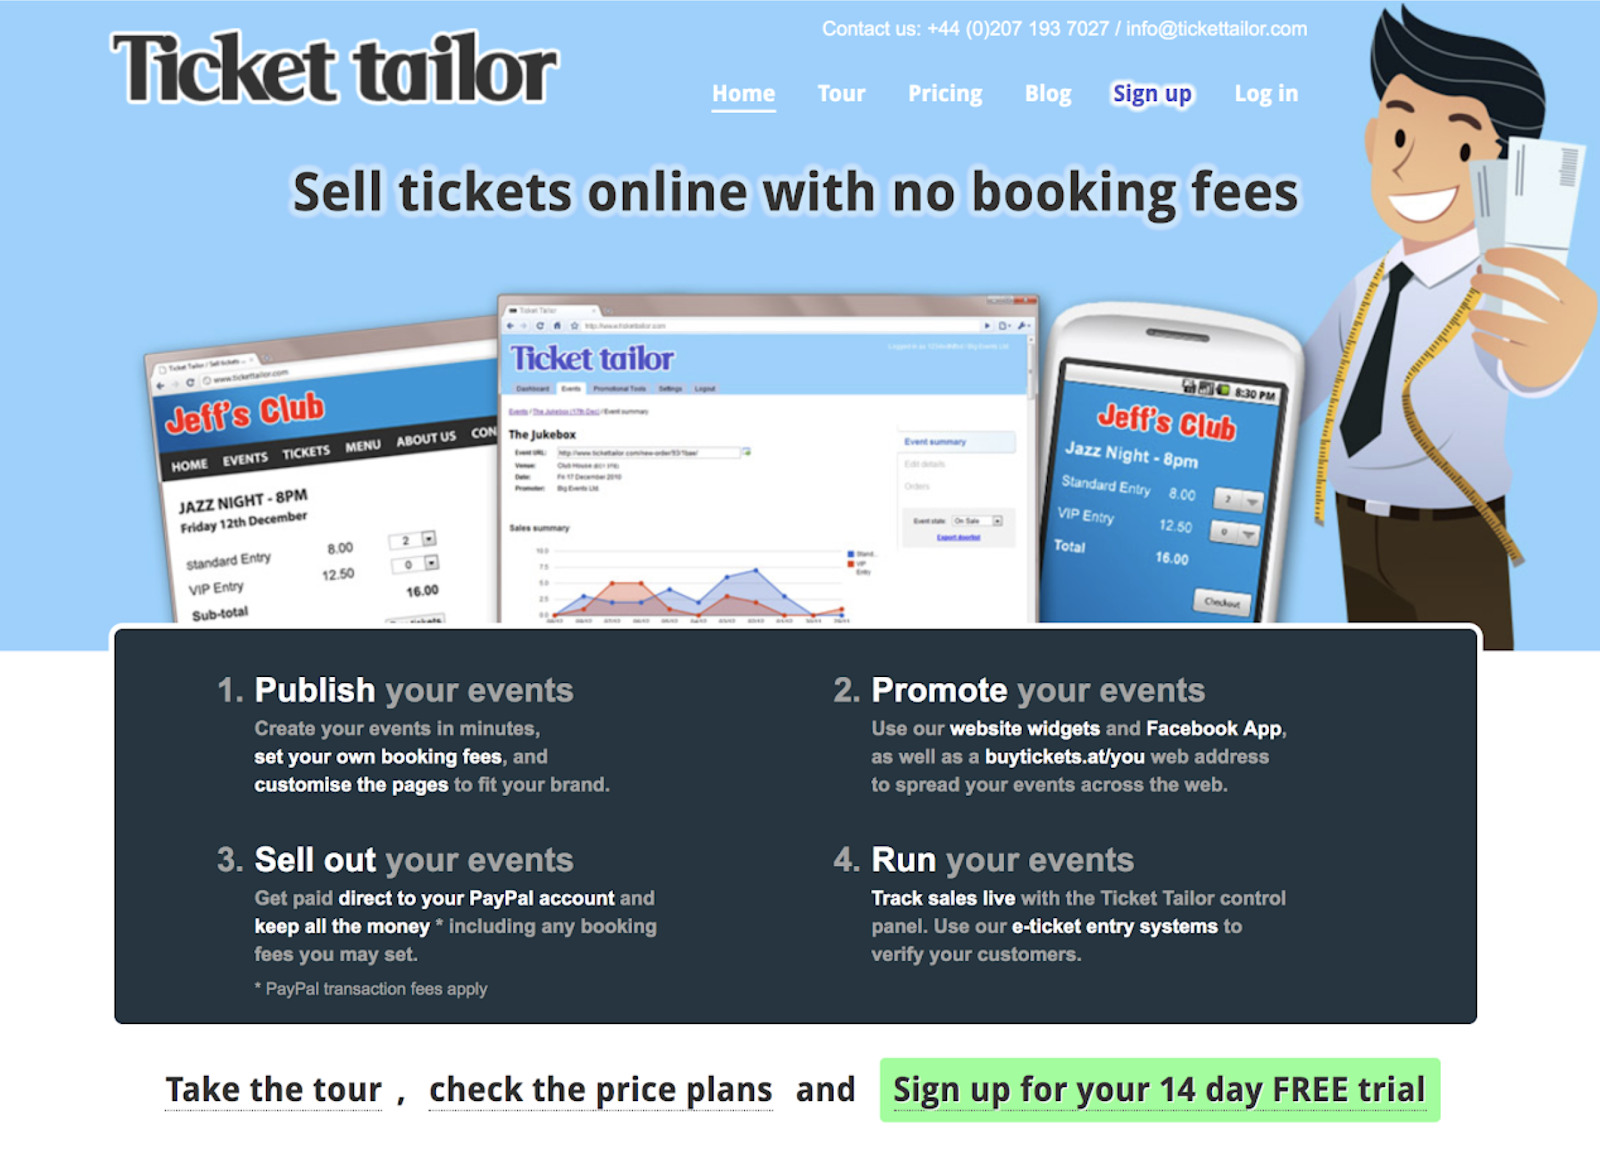 how-i-started-a-100k-month-ticketing-platform-that-sells-more-than-5-million-tickets-a-year-worldwide